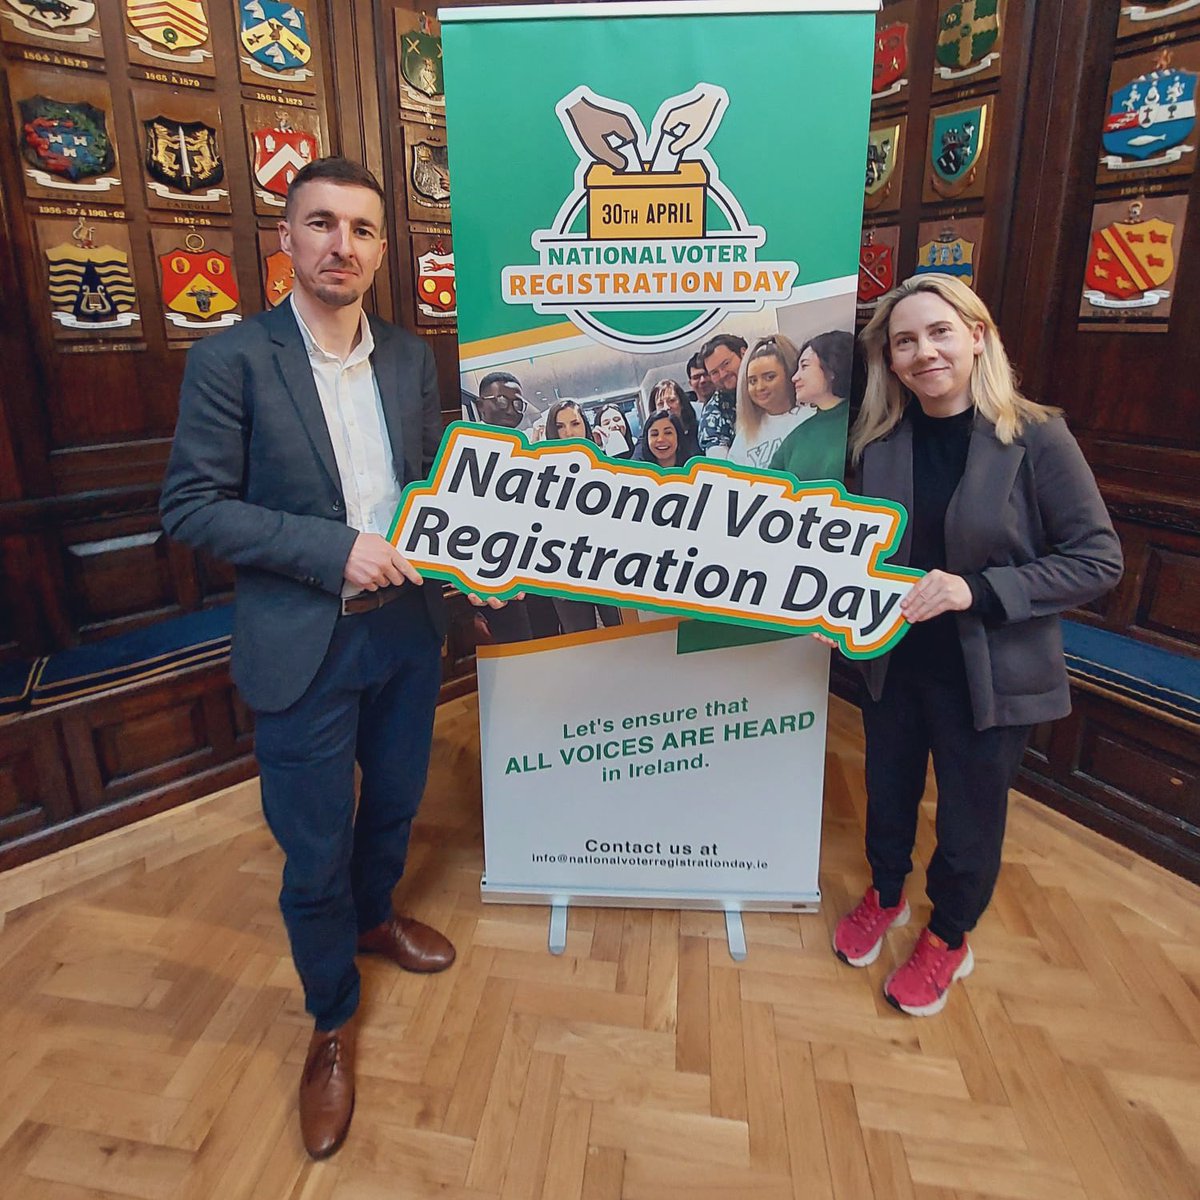 Well done to my @ICOSirl colleague Brian Hearne and all involved in #NationalVoterRegistrationDay today